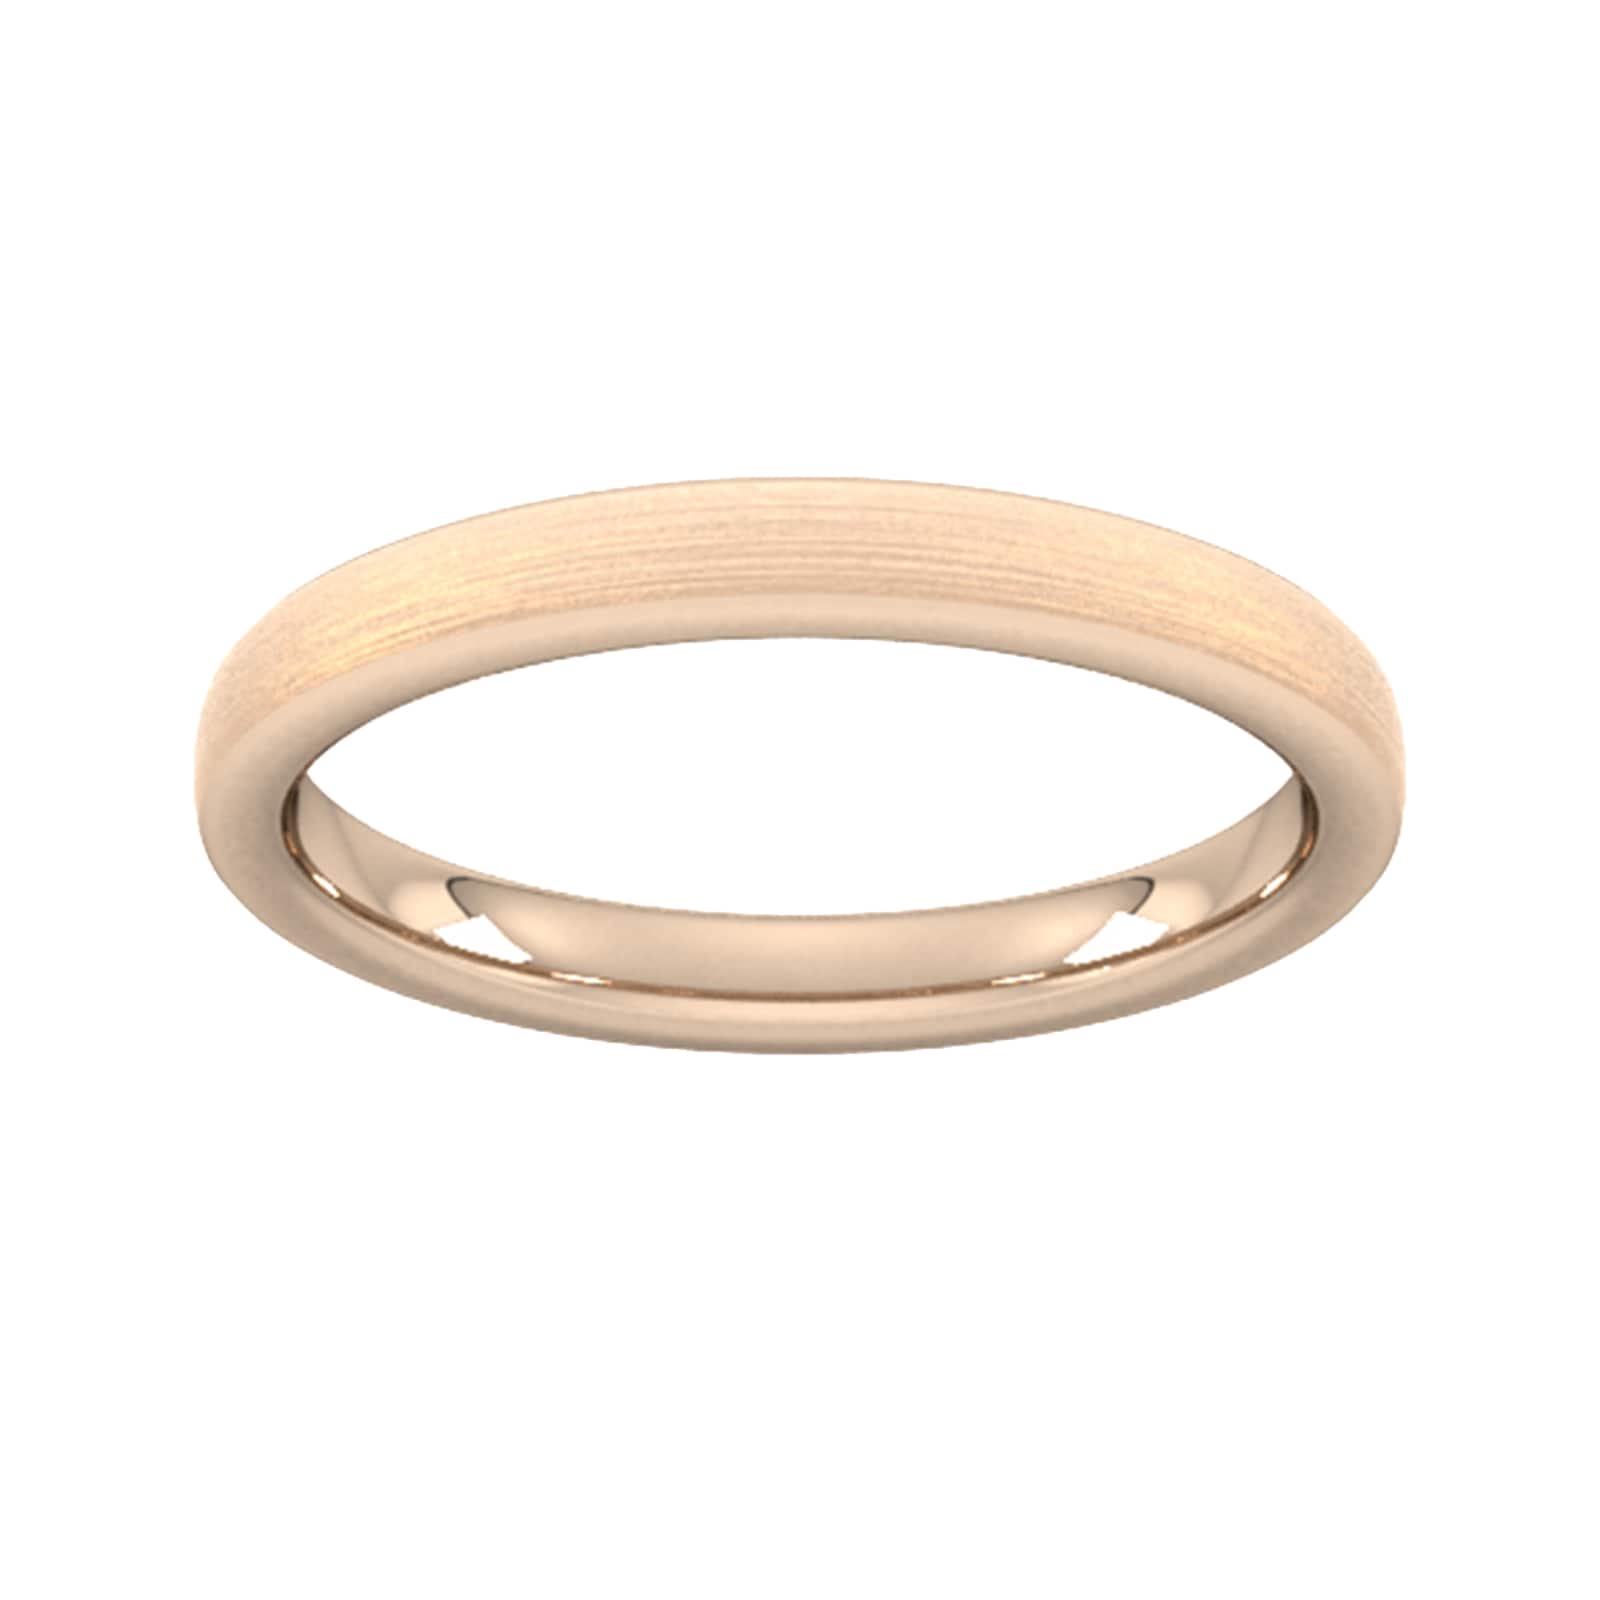 2.5mm D Shape Heavy Polished Chamfered Edges With Matt Centre Wedding Ring In 9 Carat Rose Gold - Ring Size R